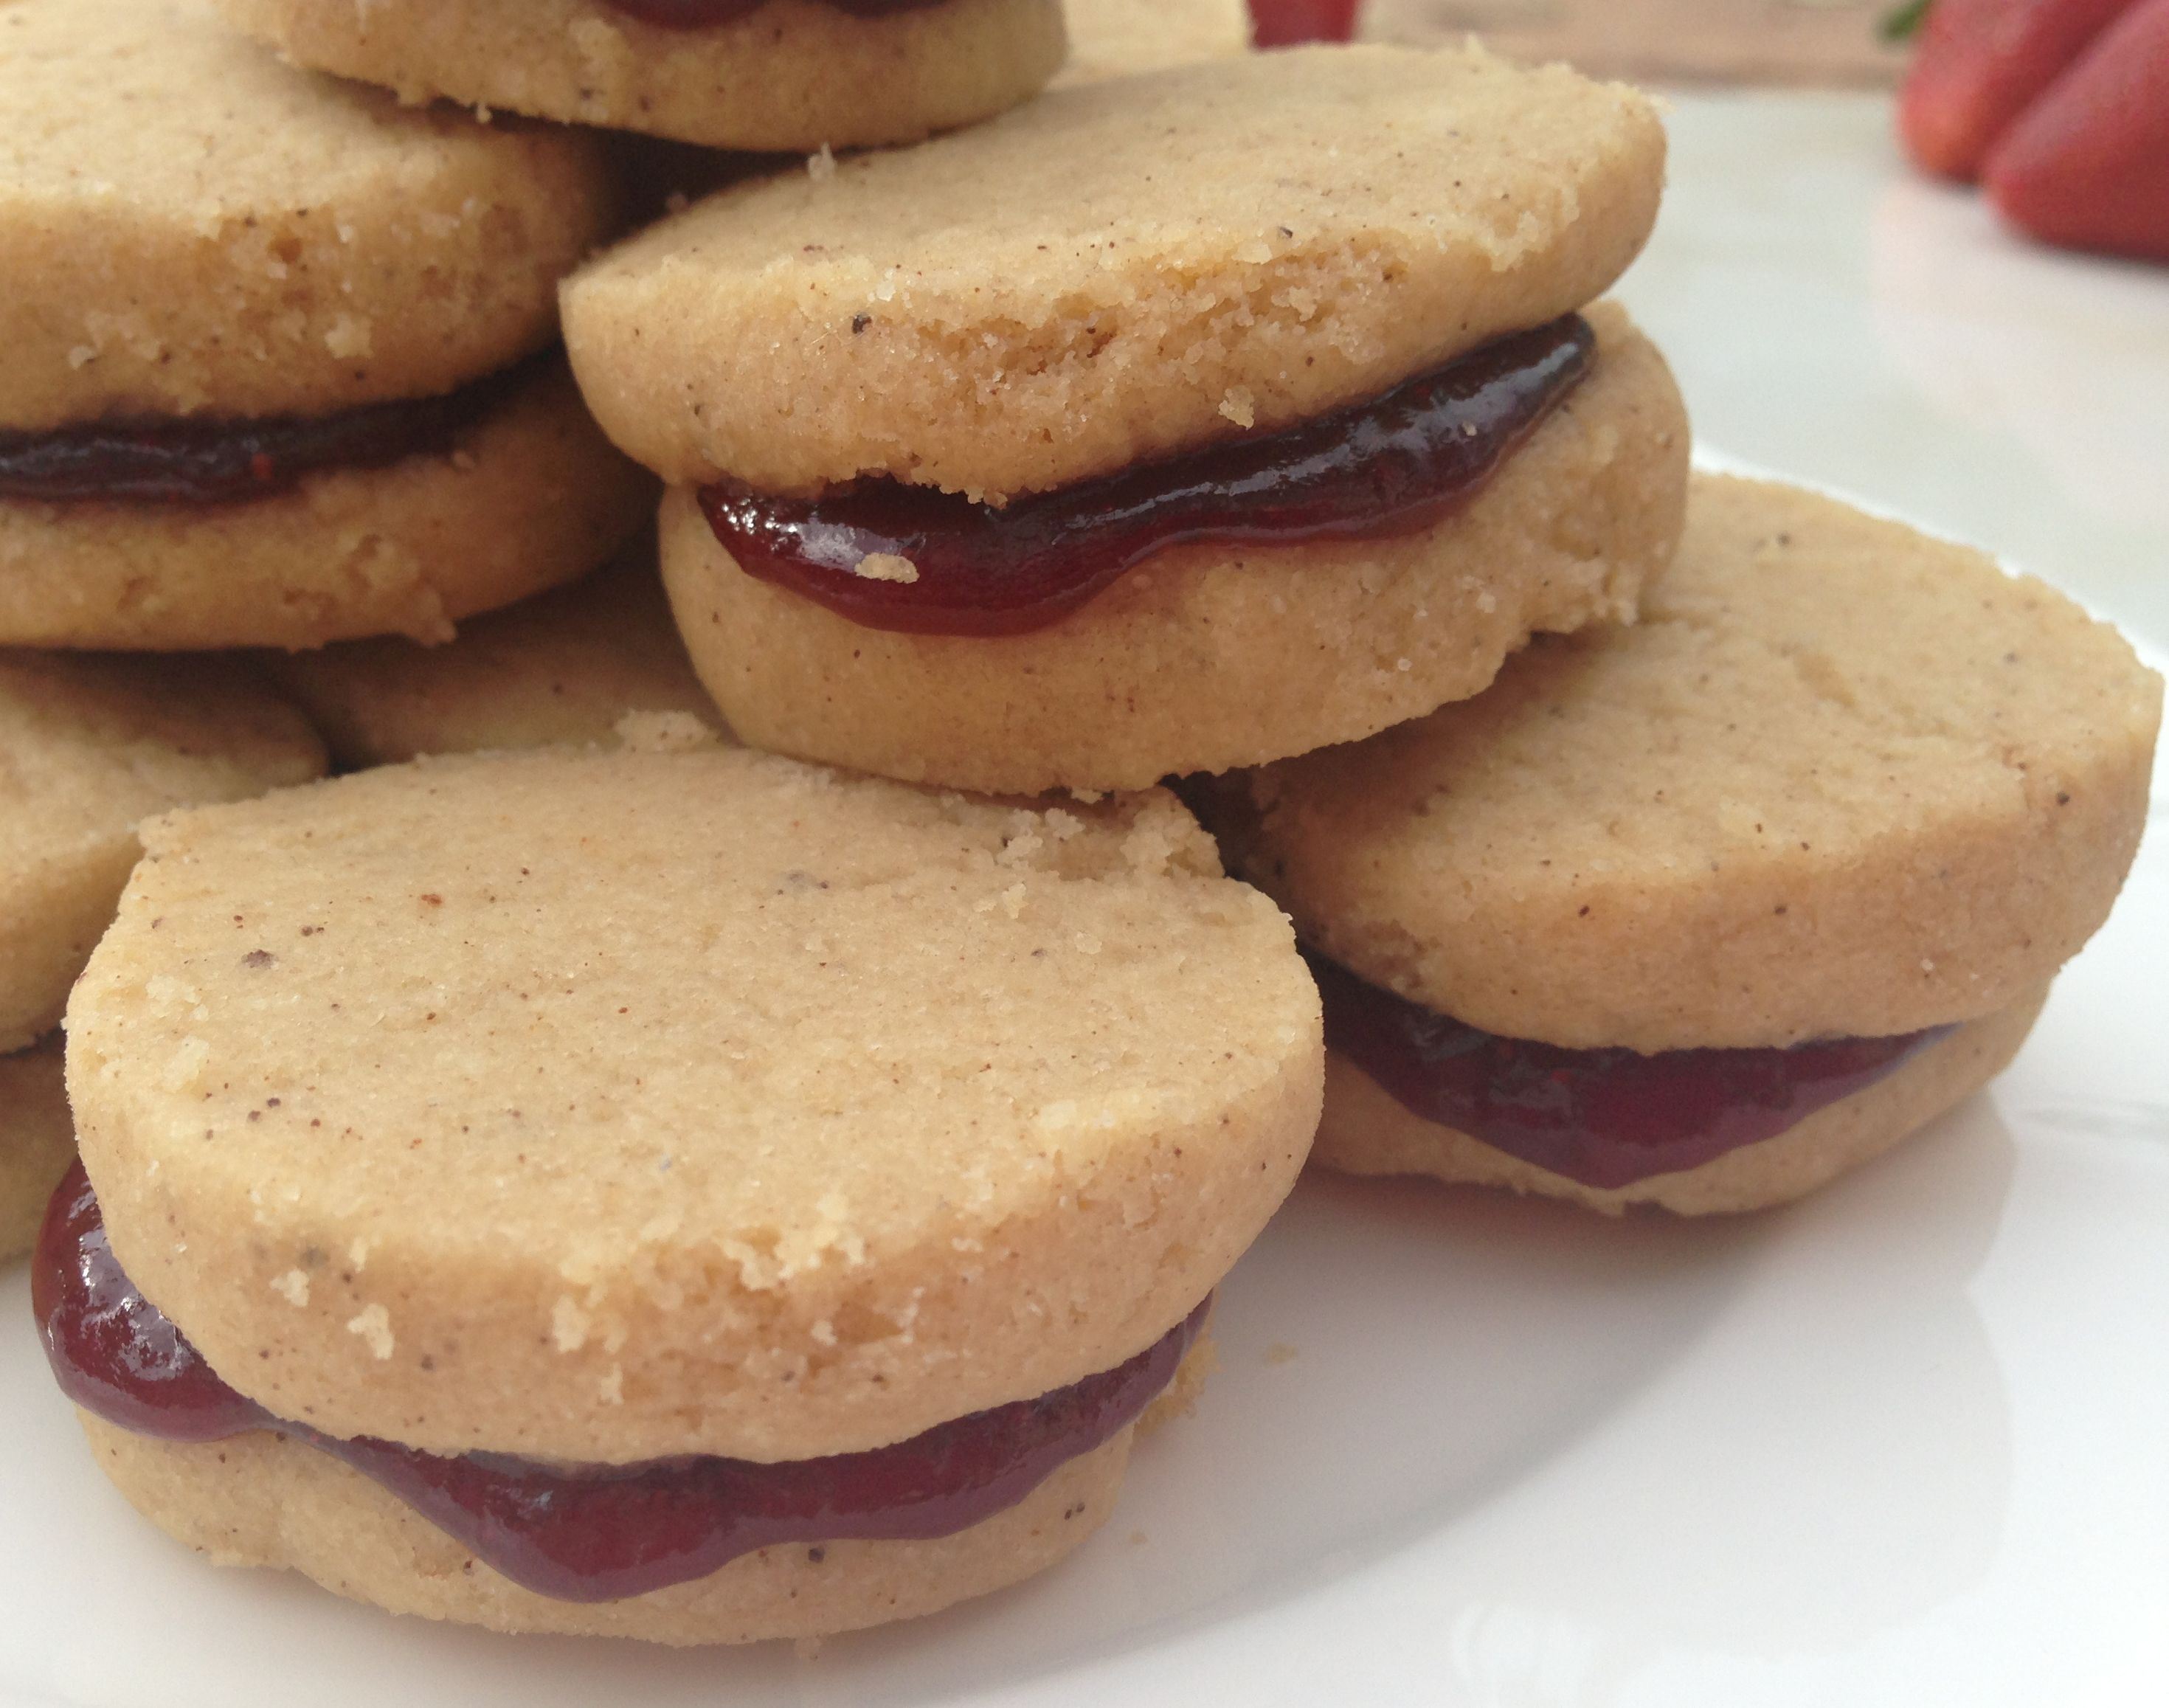 However, they are not just an ordinary shortbread cookie. 